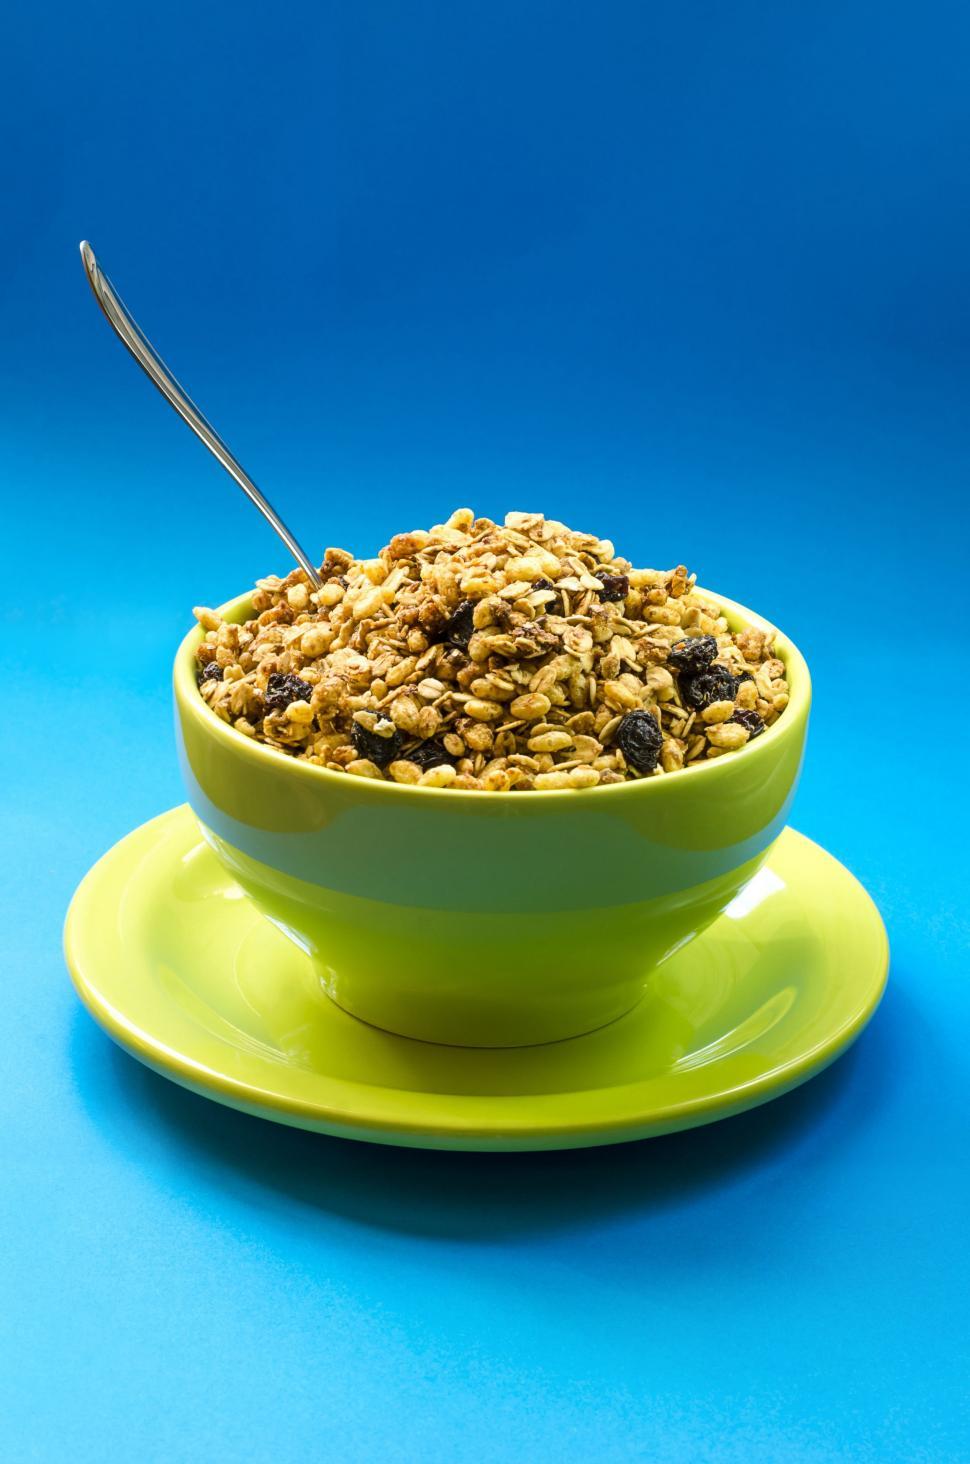 Free Image of Bowl of Granola with Spoon 